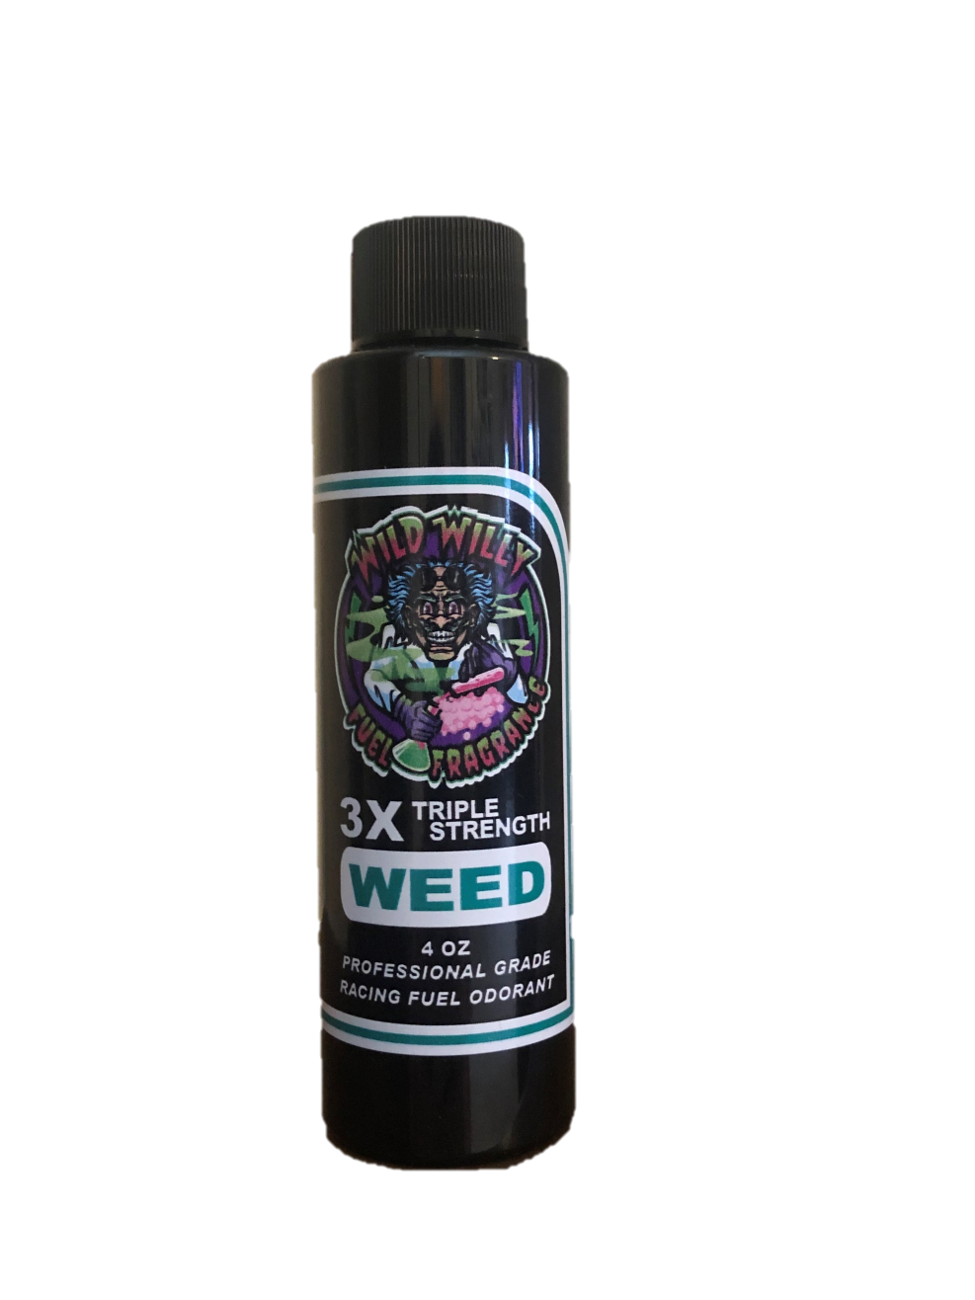 Weed - Wild Willy Fuel Fragrance - 3X Triple Strength!